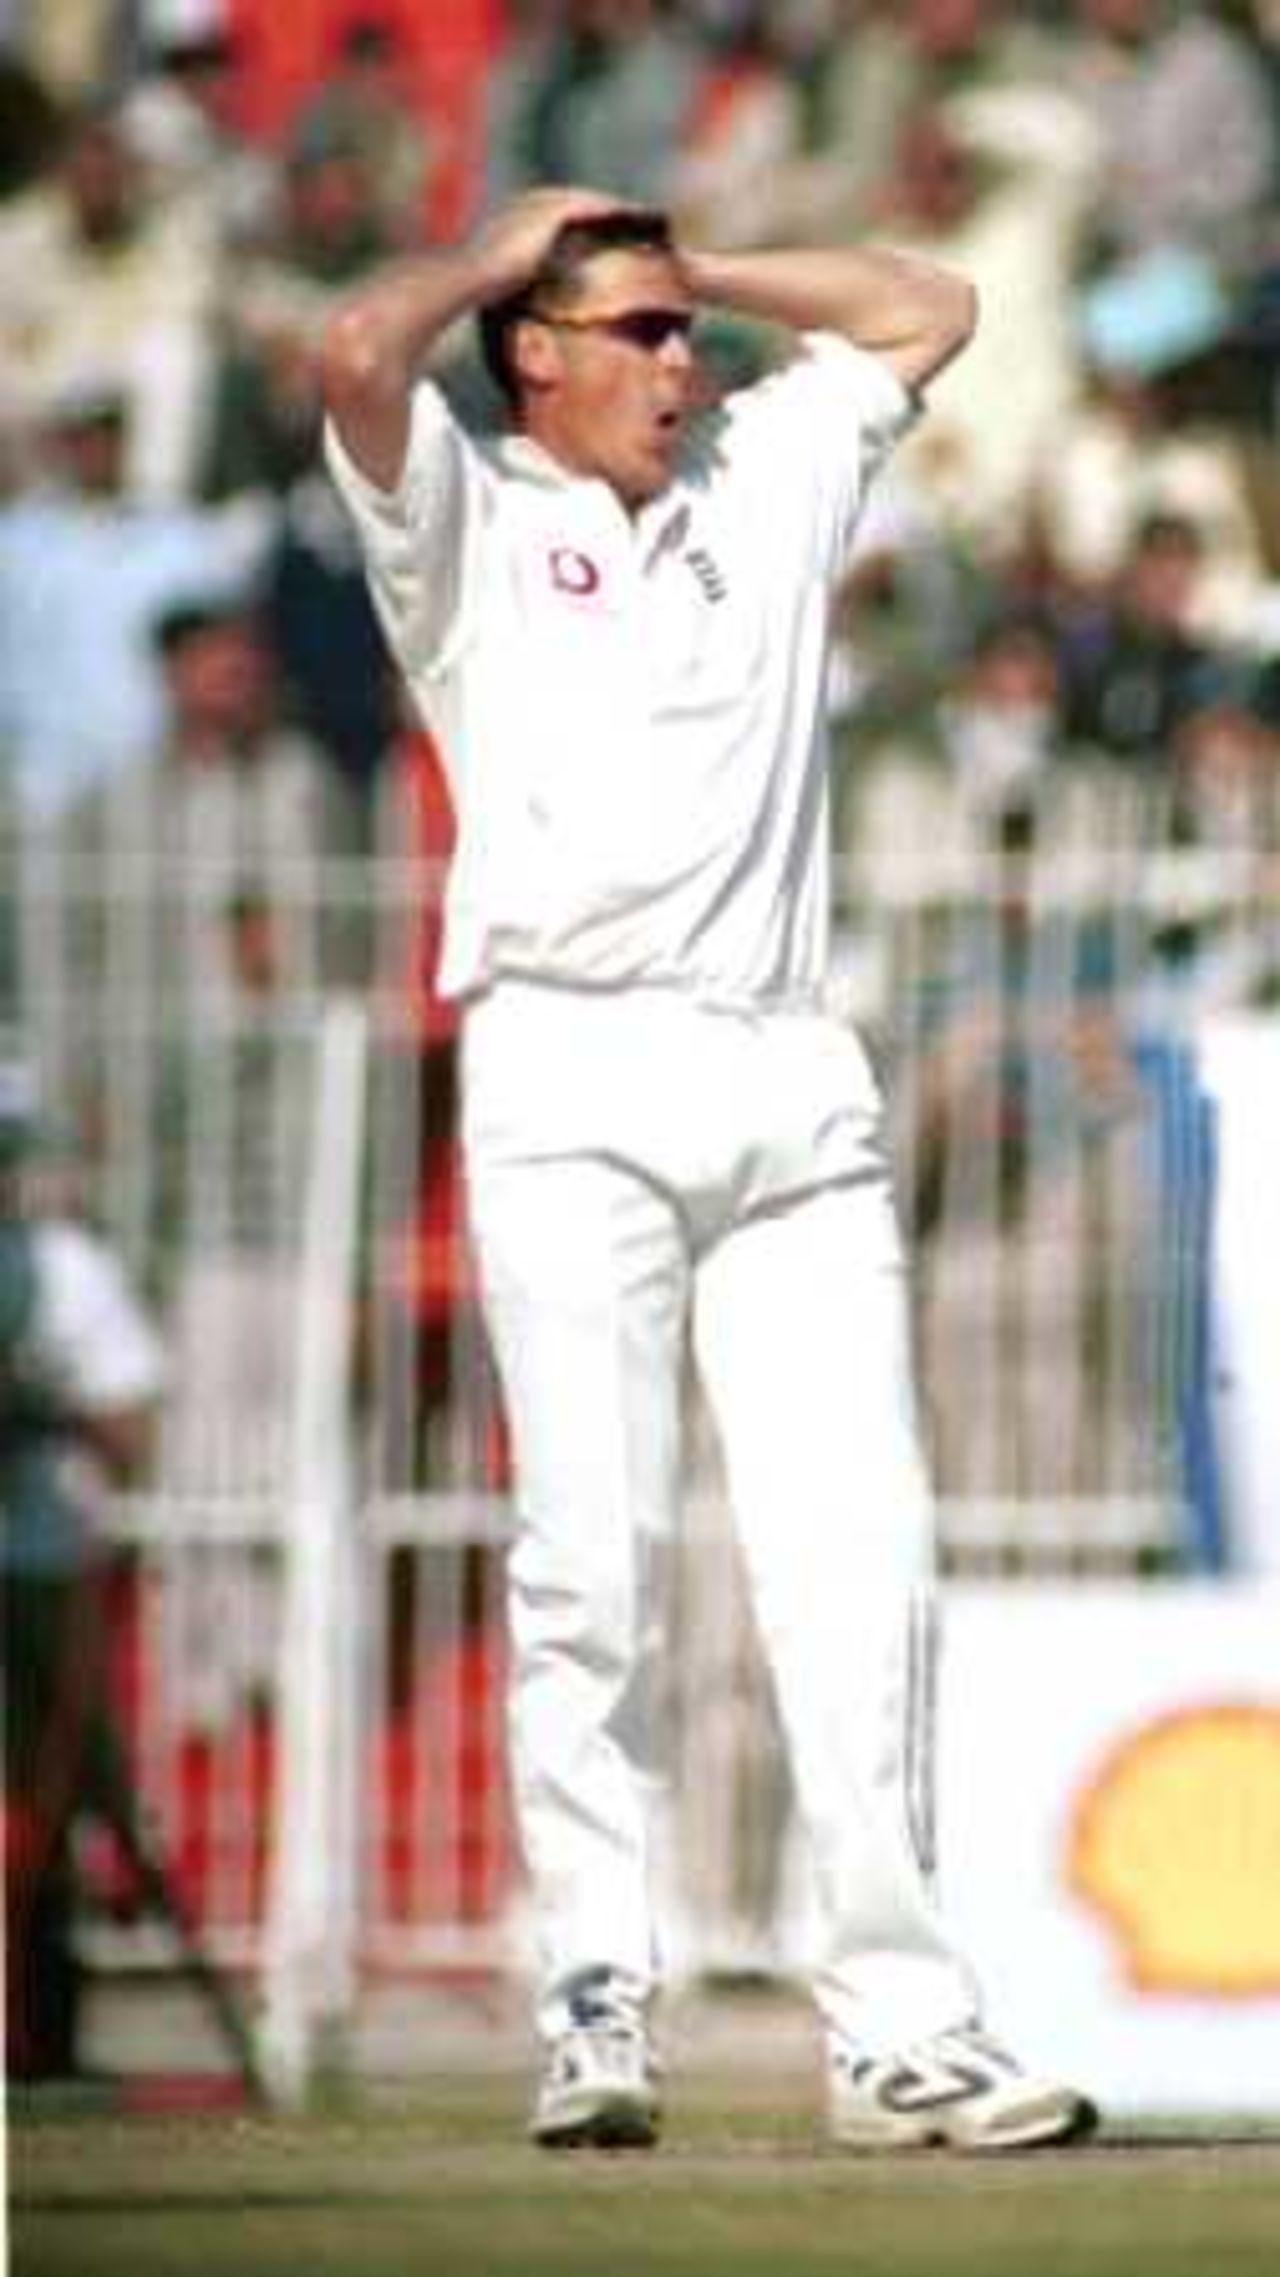 Giles showing disappointment at a possible dismissal, Day 1, 2nd Test Match, Pakistan v England at Faisalabad, 29 Nov-3 Dec 2000